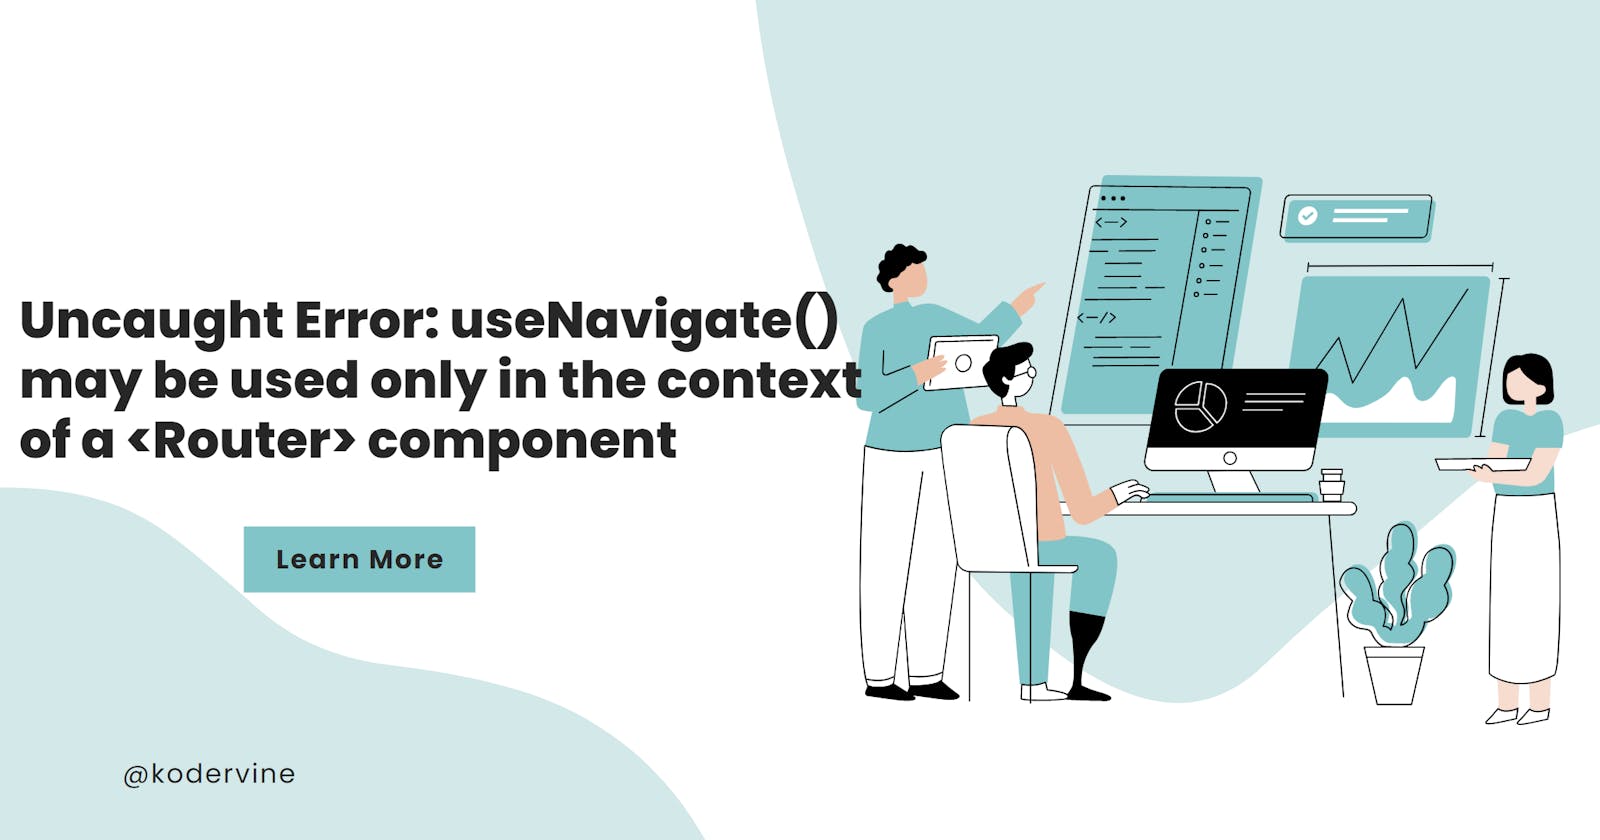 Uncaught Error: useNavigate() may be used only in the context of a <Router> component